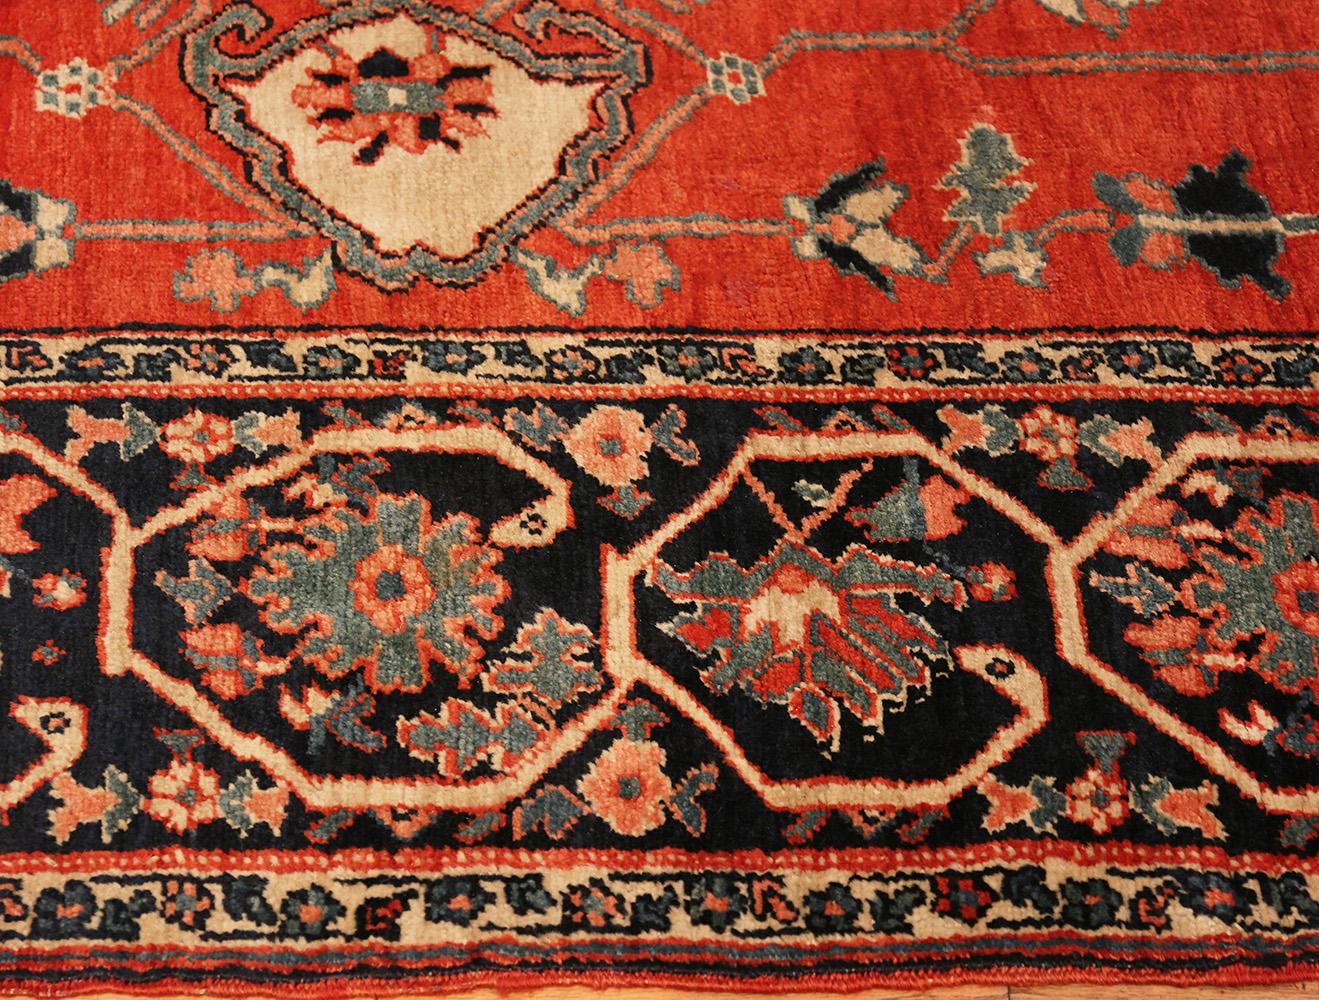 A beautiful and rare long and narrow size antique Persian Heriz rug, country of origin / rug type: antique Persian rugs, date: circa 1920. Size: 7 ft x 18 ft (2.13 m x 5.49 m)

This splendid bright, beautiful antique Persian Heriz rug from the